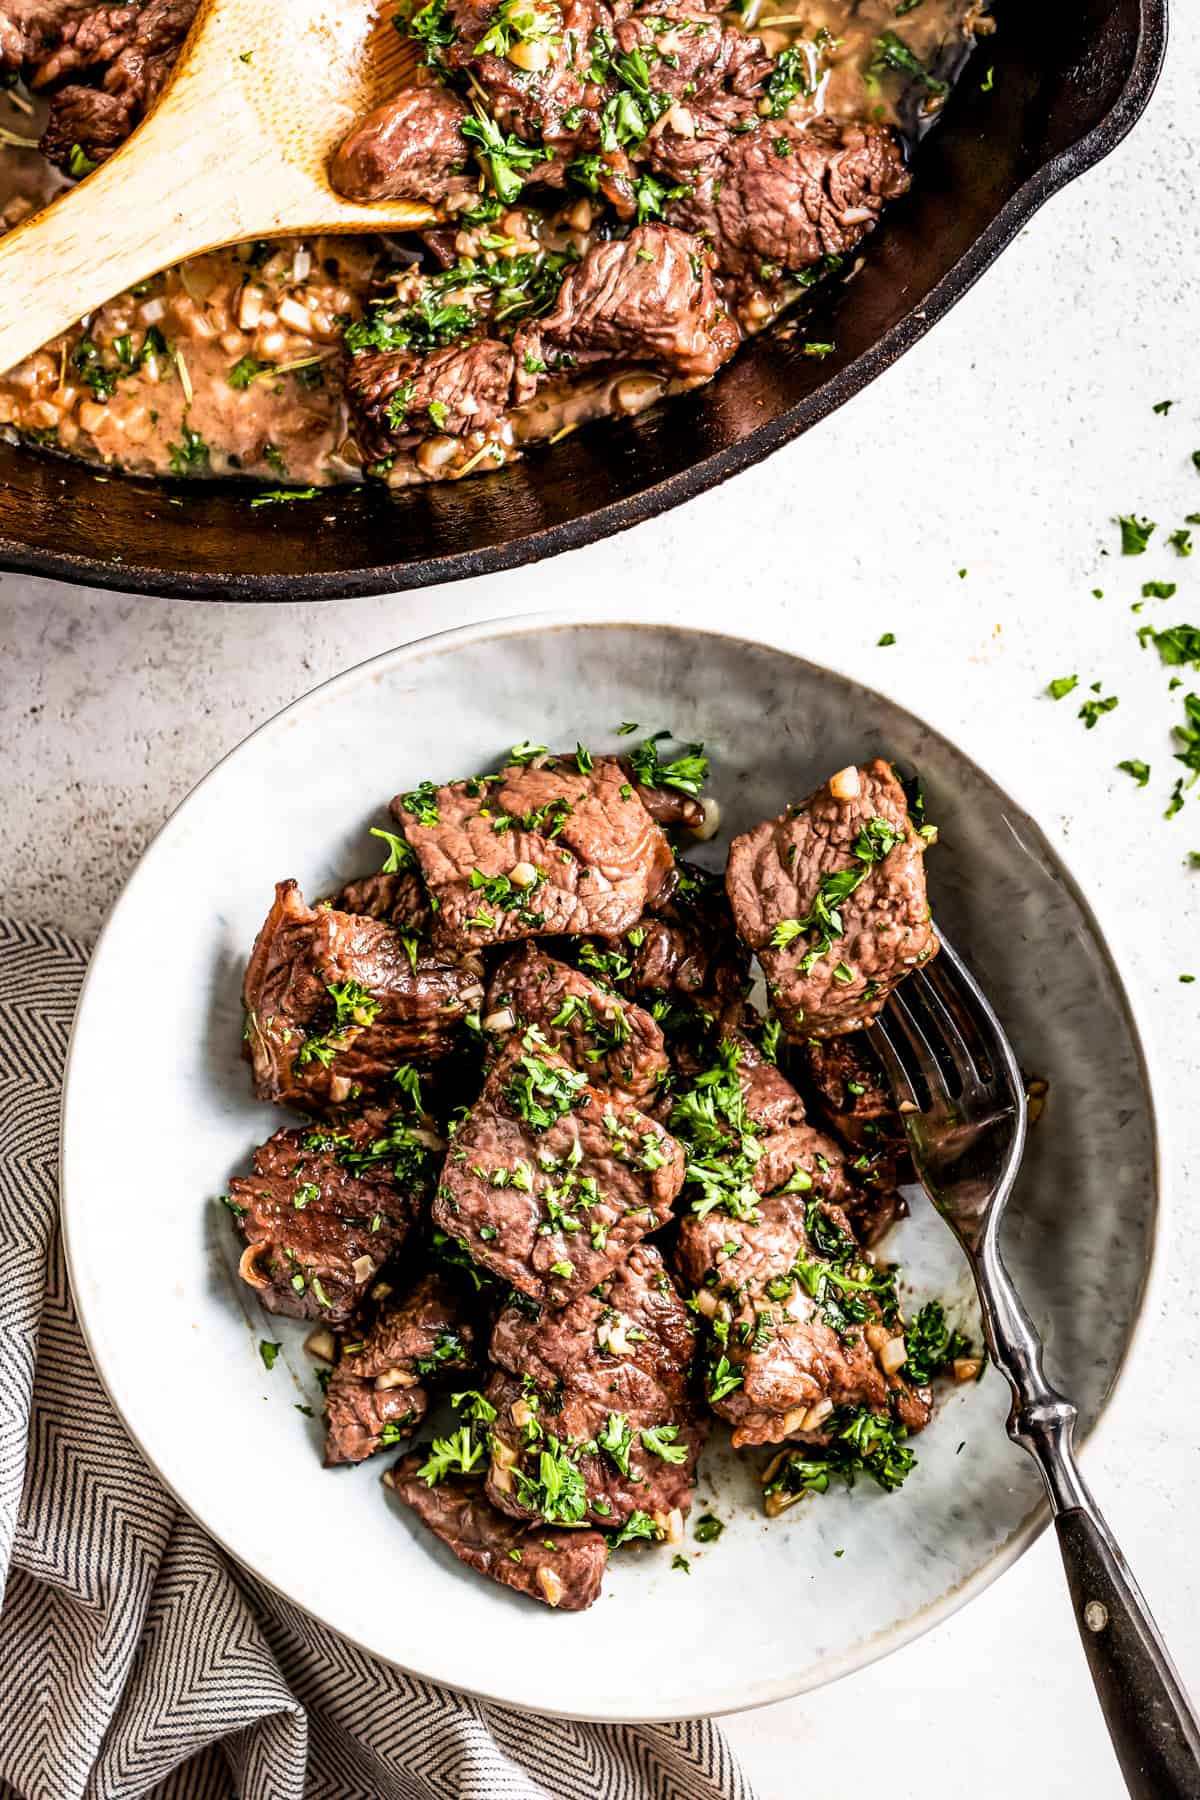 Transferring the garlic butter steak bites from a skillet to the plate.